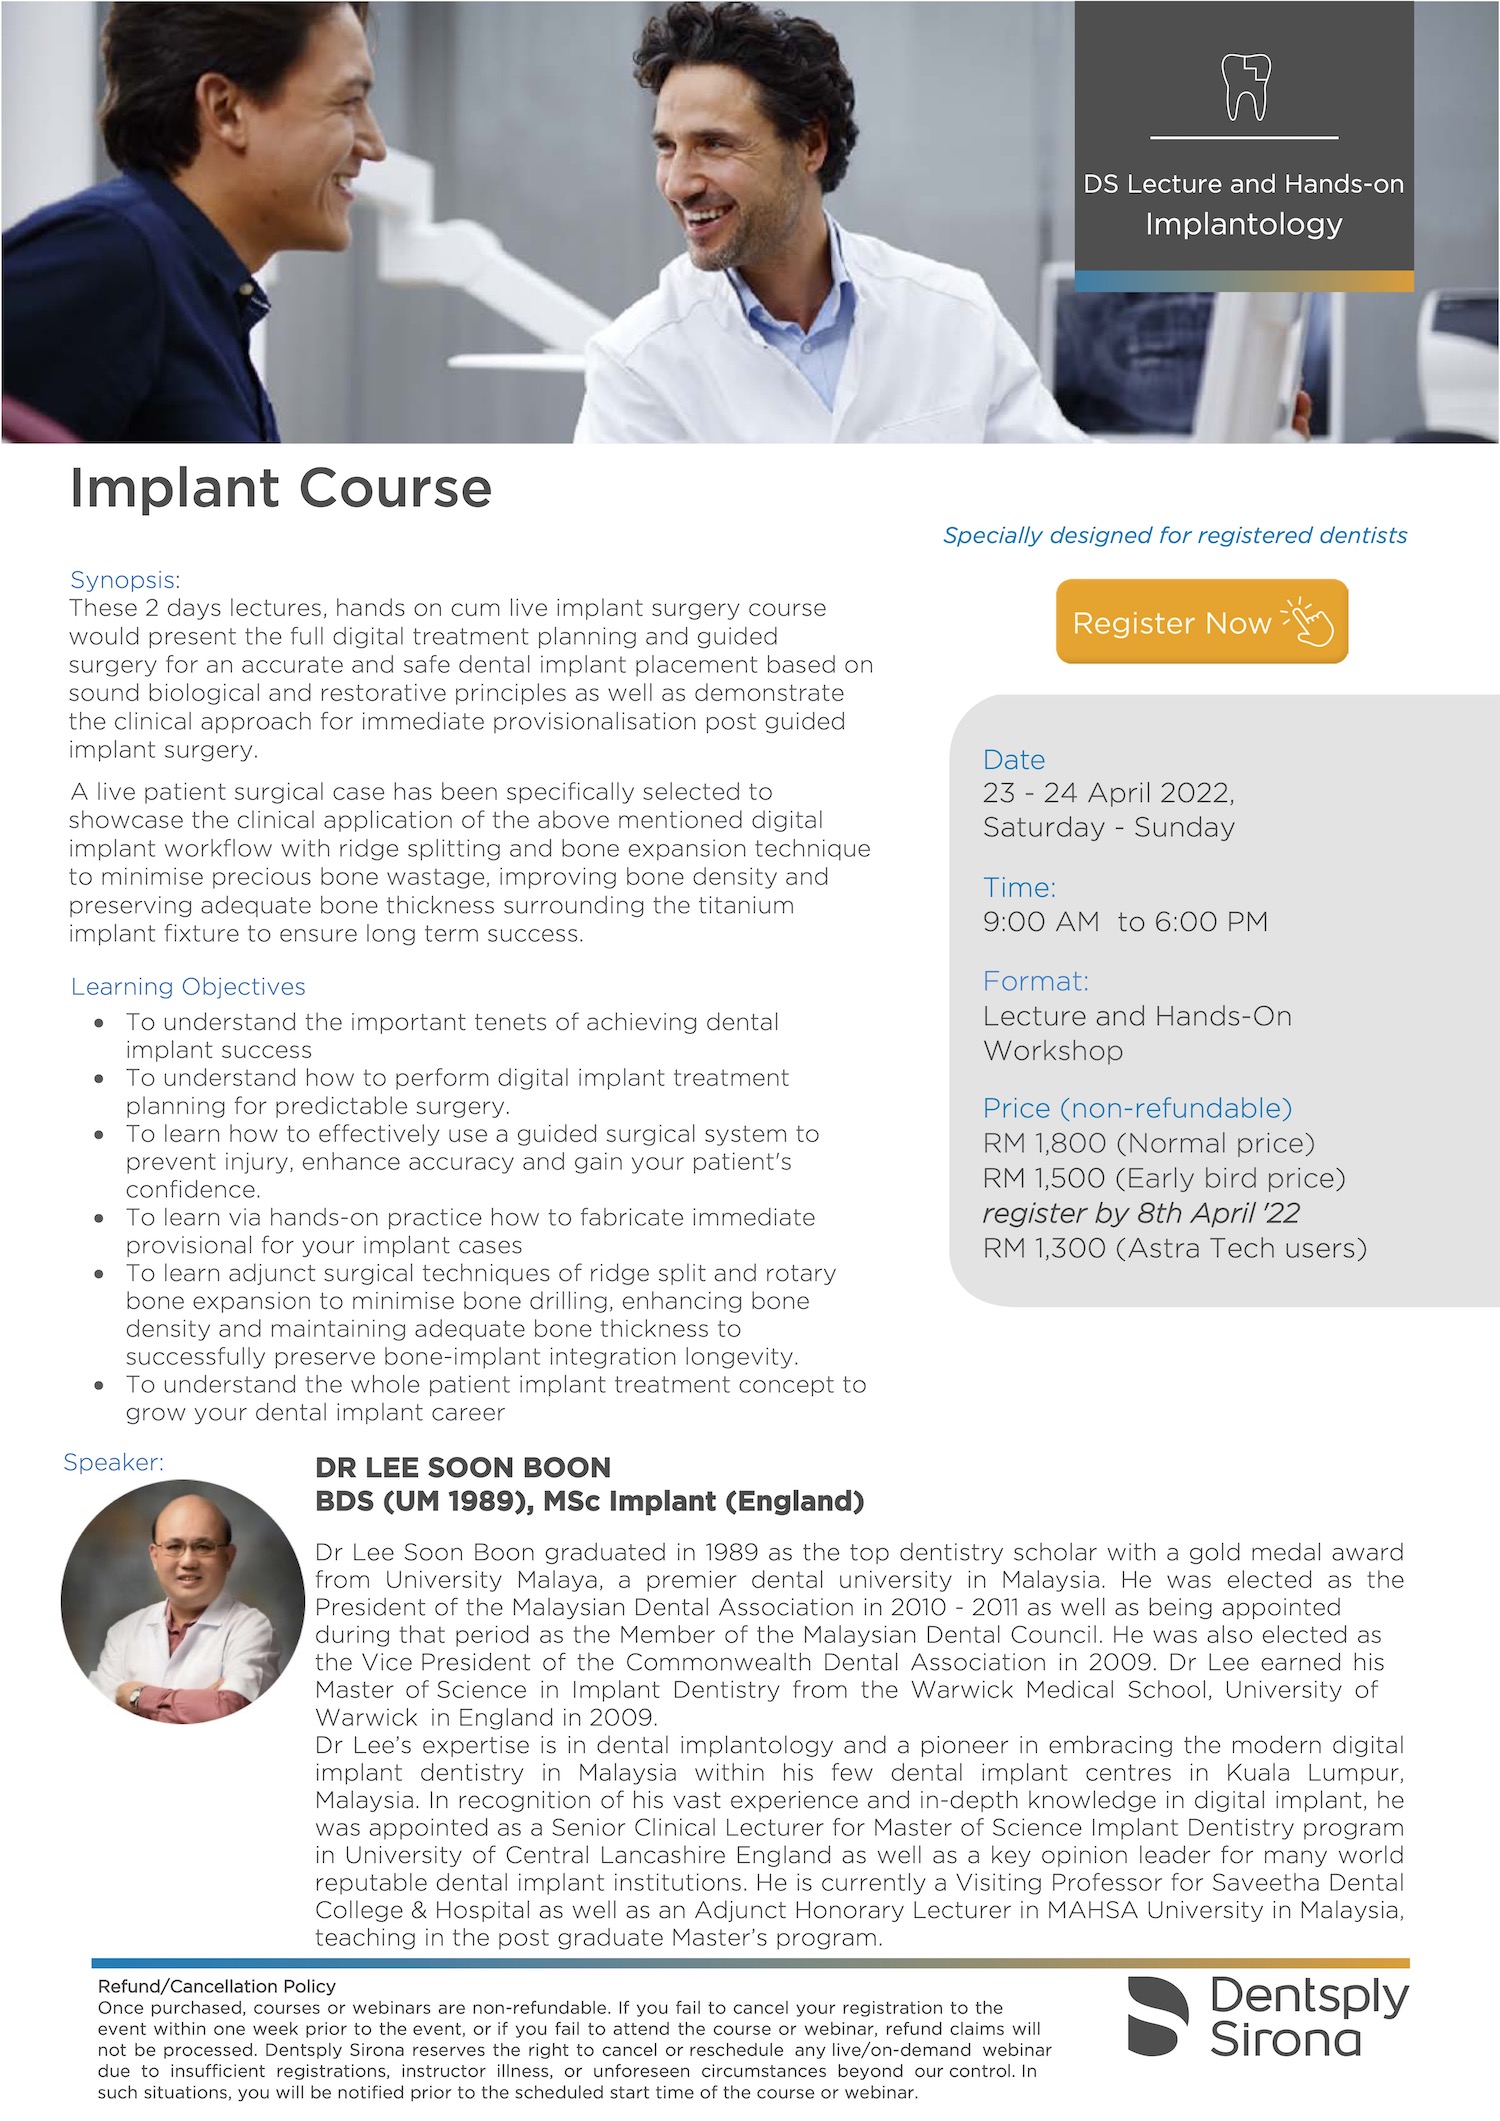 implant-course-lee-soon-boon-dentistsnearby-1